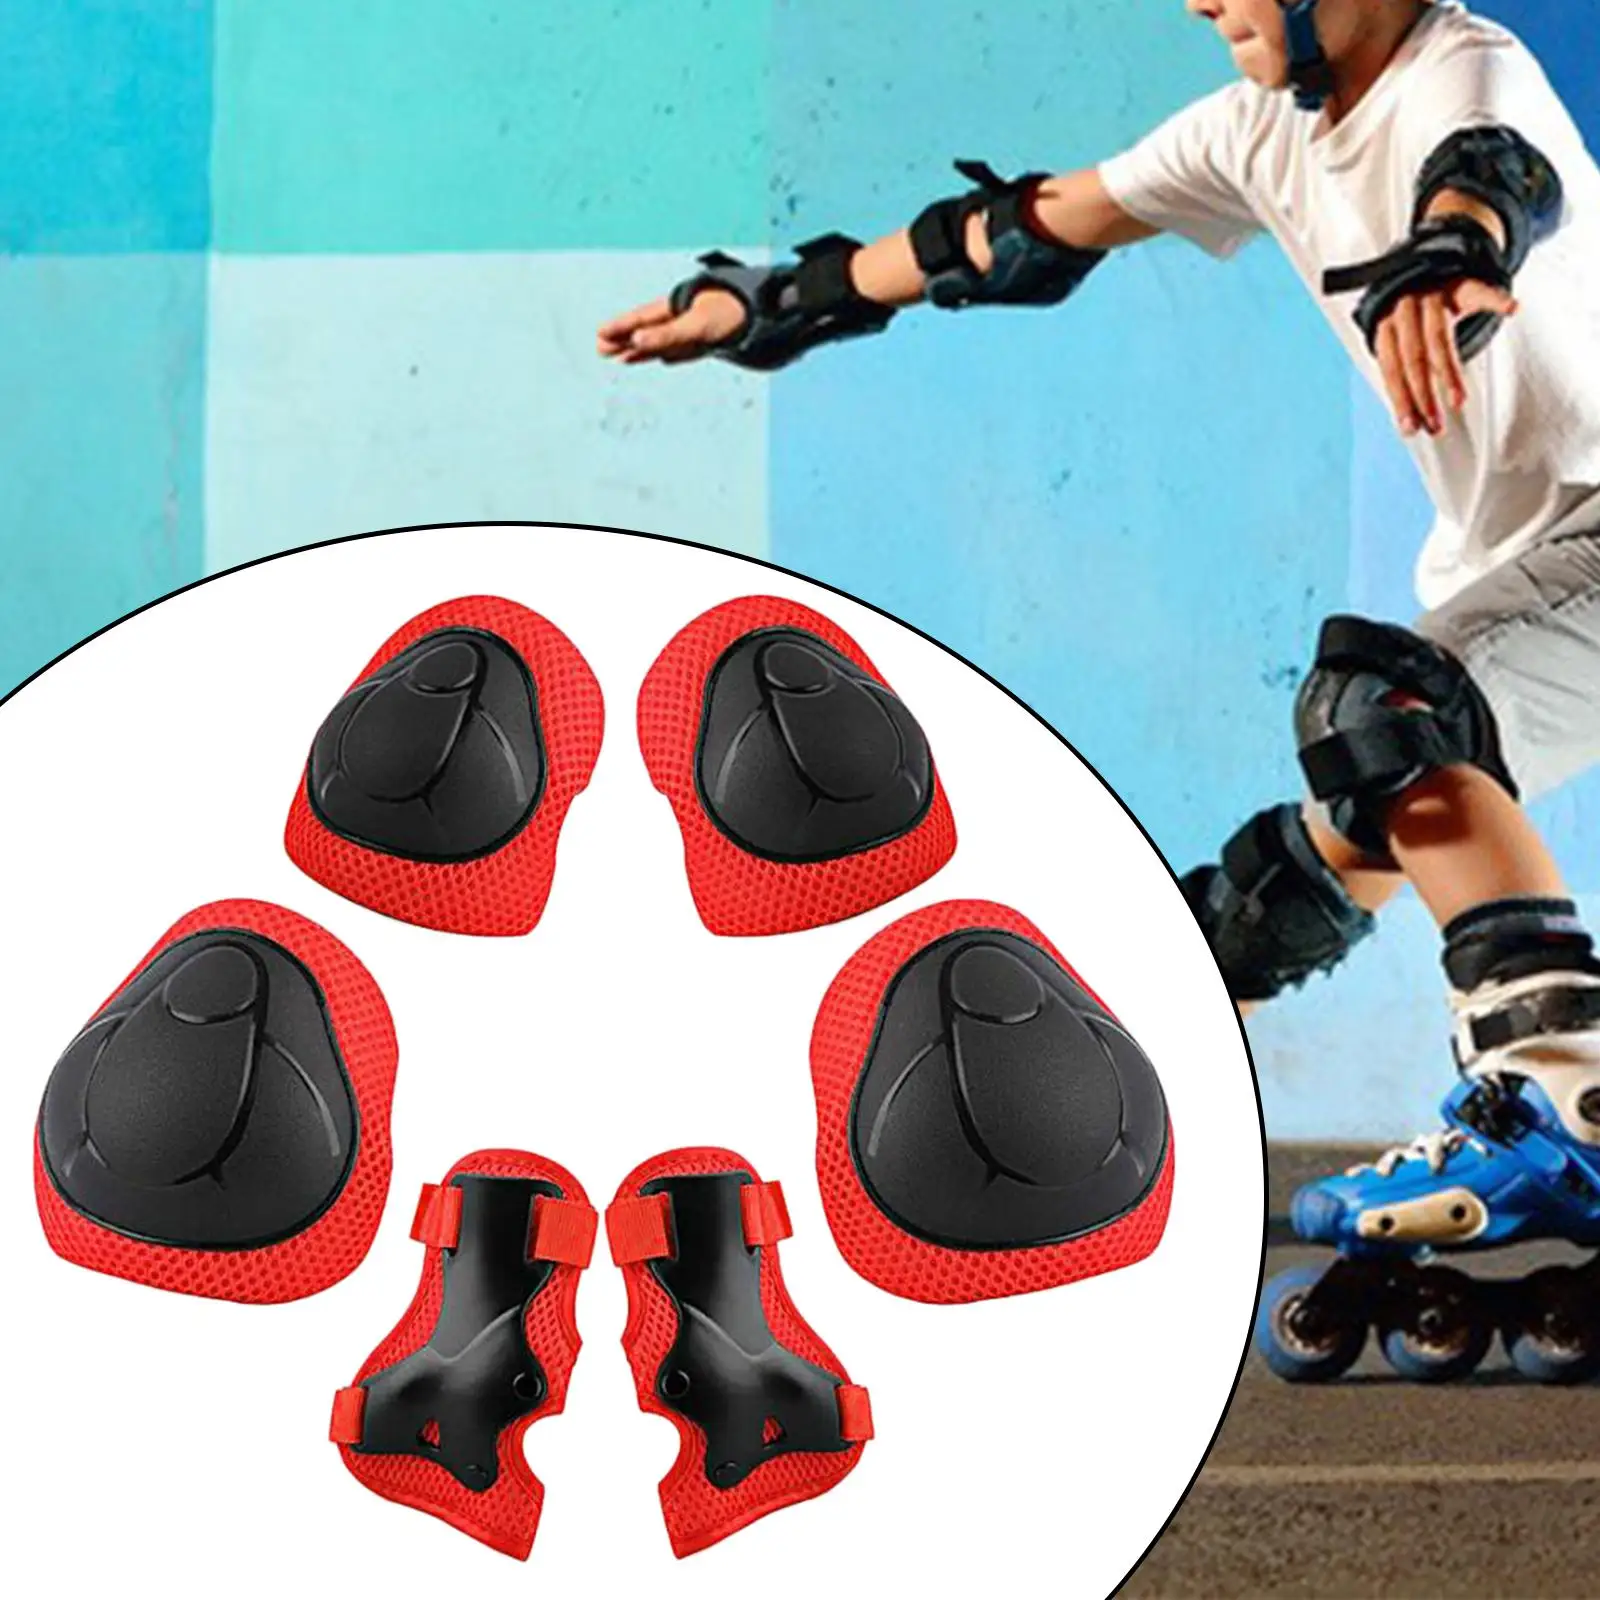 Protective Child Gear Set Wrist Elbow Knee Pads Safe for Skateboarding Outdoor Activities Rock Climbing Rollerblading Riding